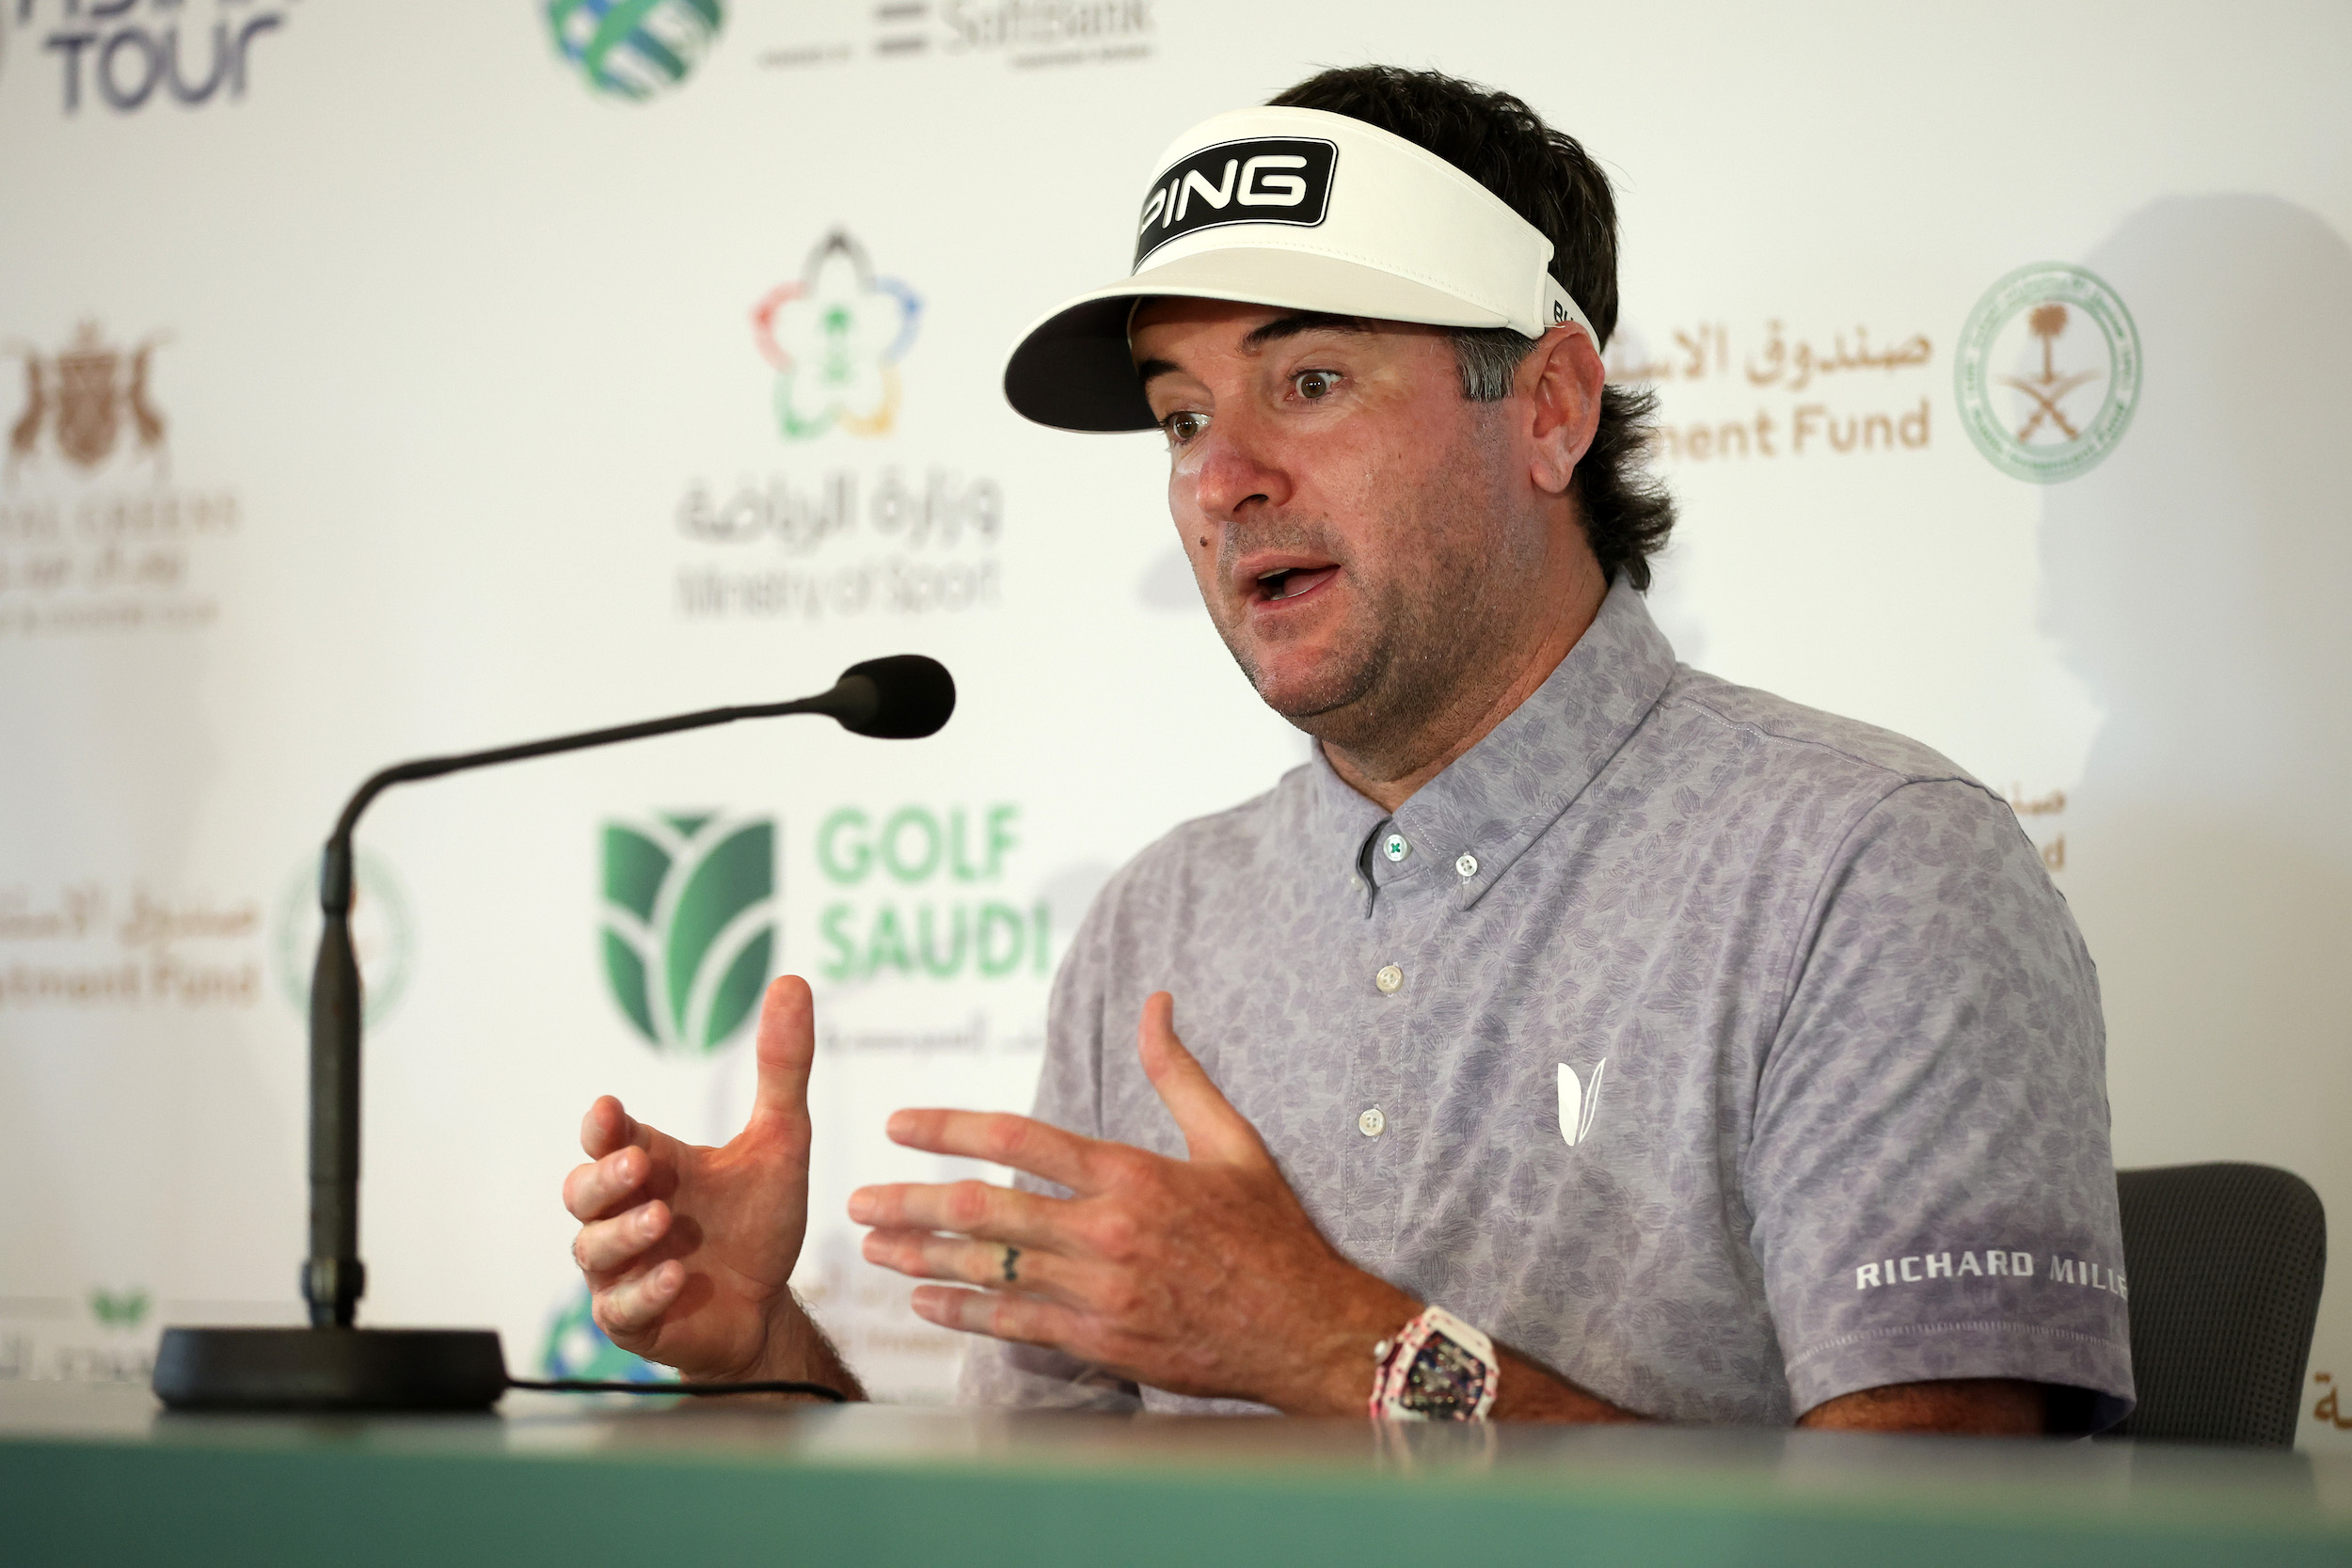 Bubba Watson speaks at a press conference.